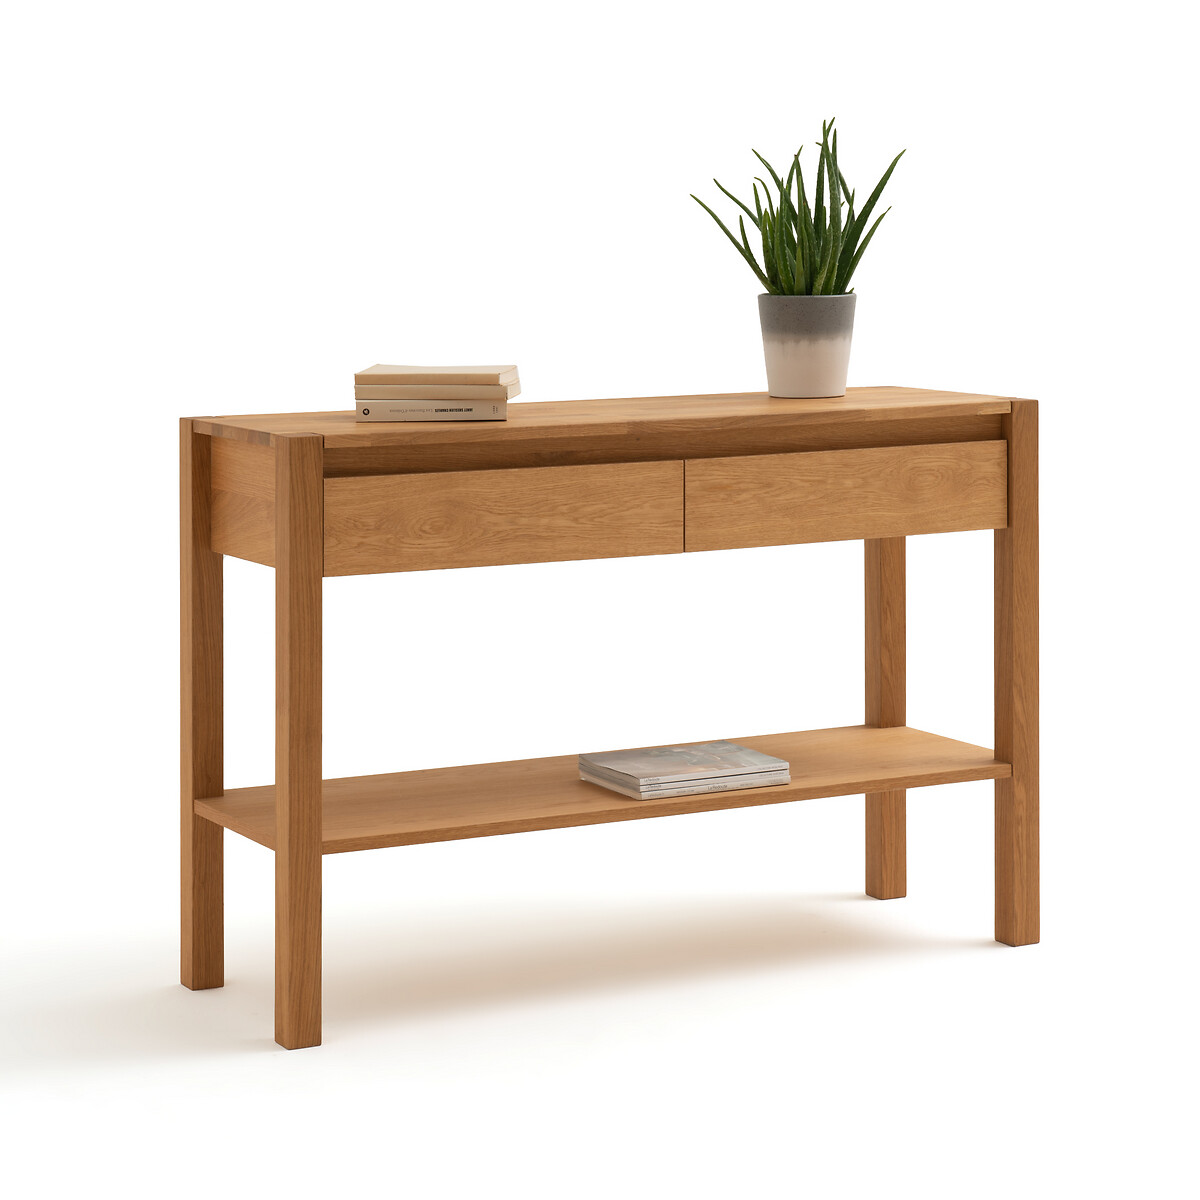 Adelita Oak Console Table with 2 Drawers